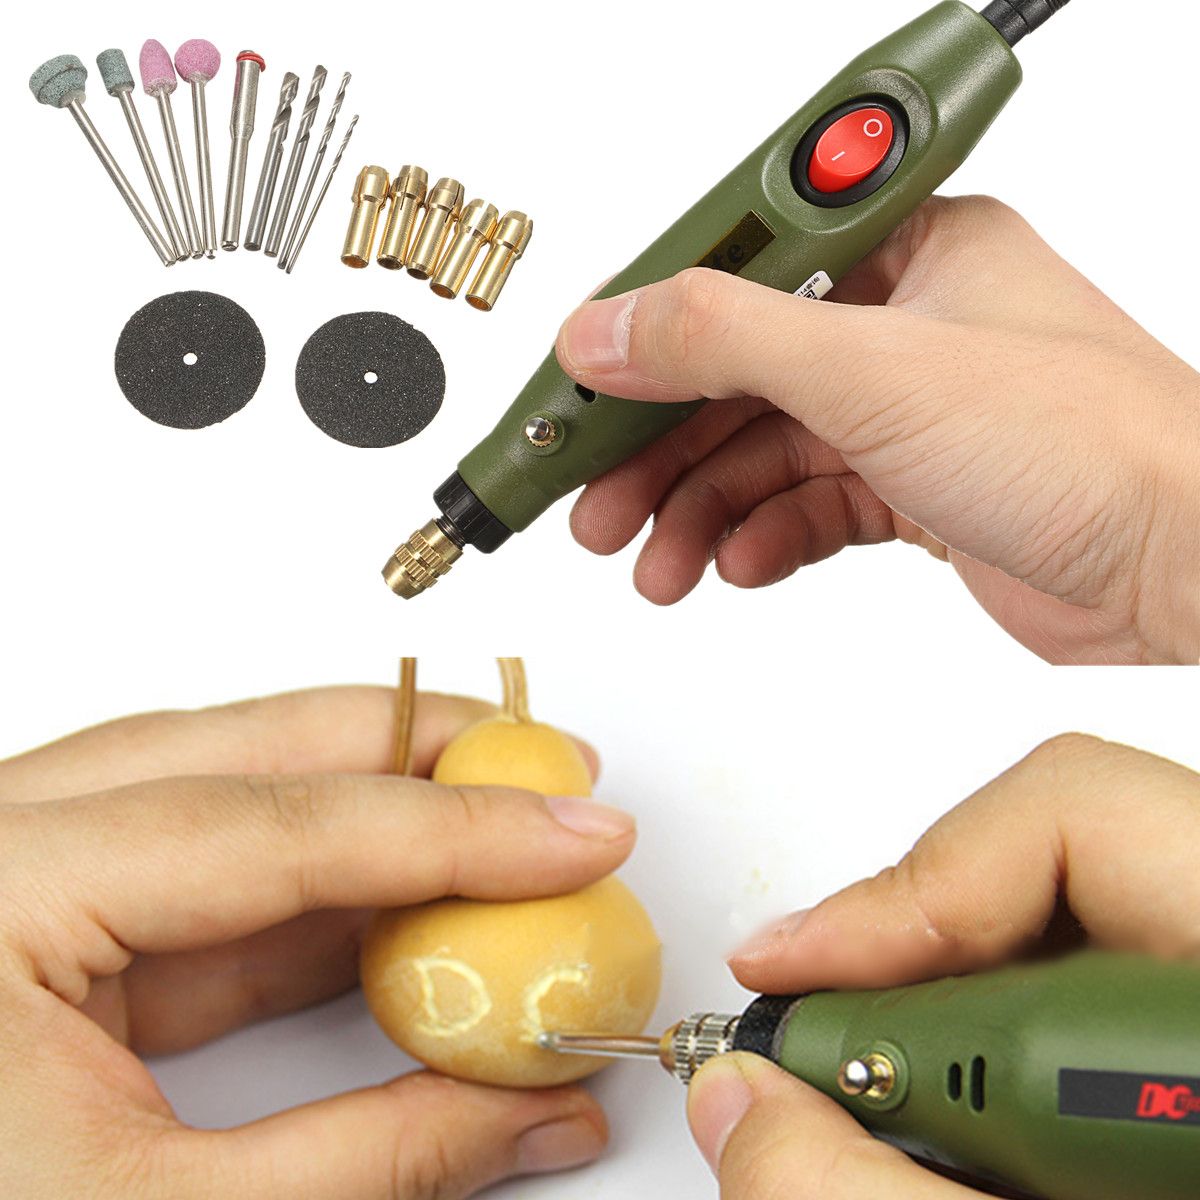 Raitool-trade-DC-12V-Electric-Engraver-Carving-Pen-Power-Nail-Art-Jewellery-Tool-with-8-Drill-Bits-1185172